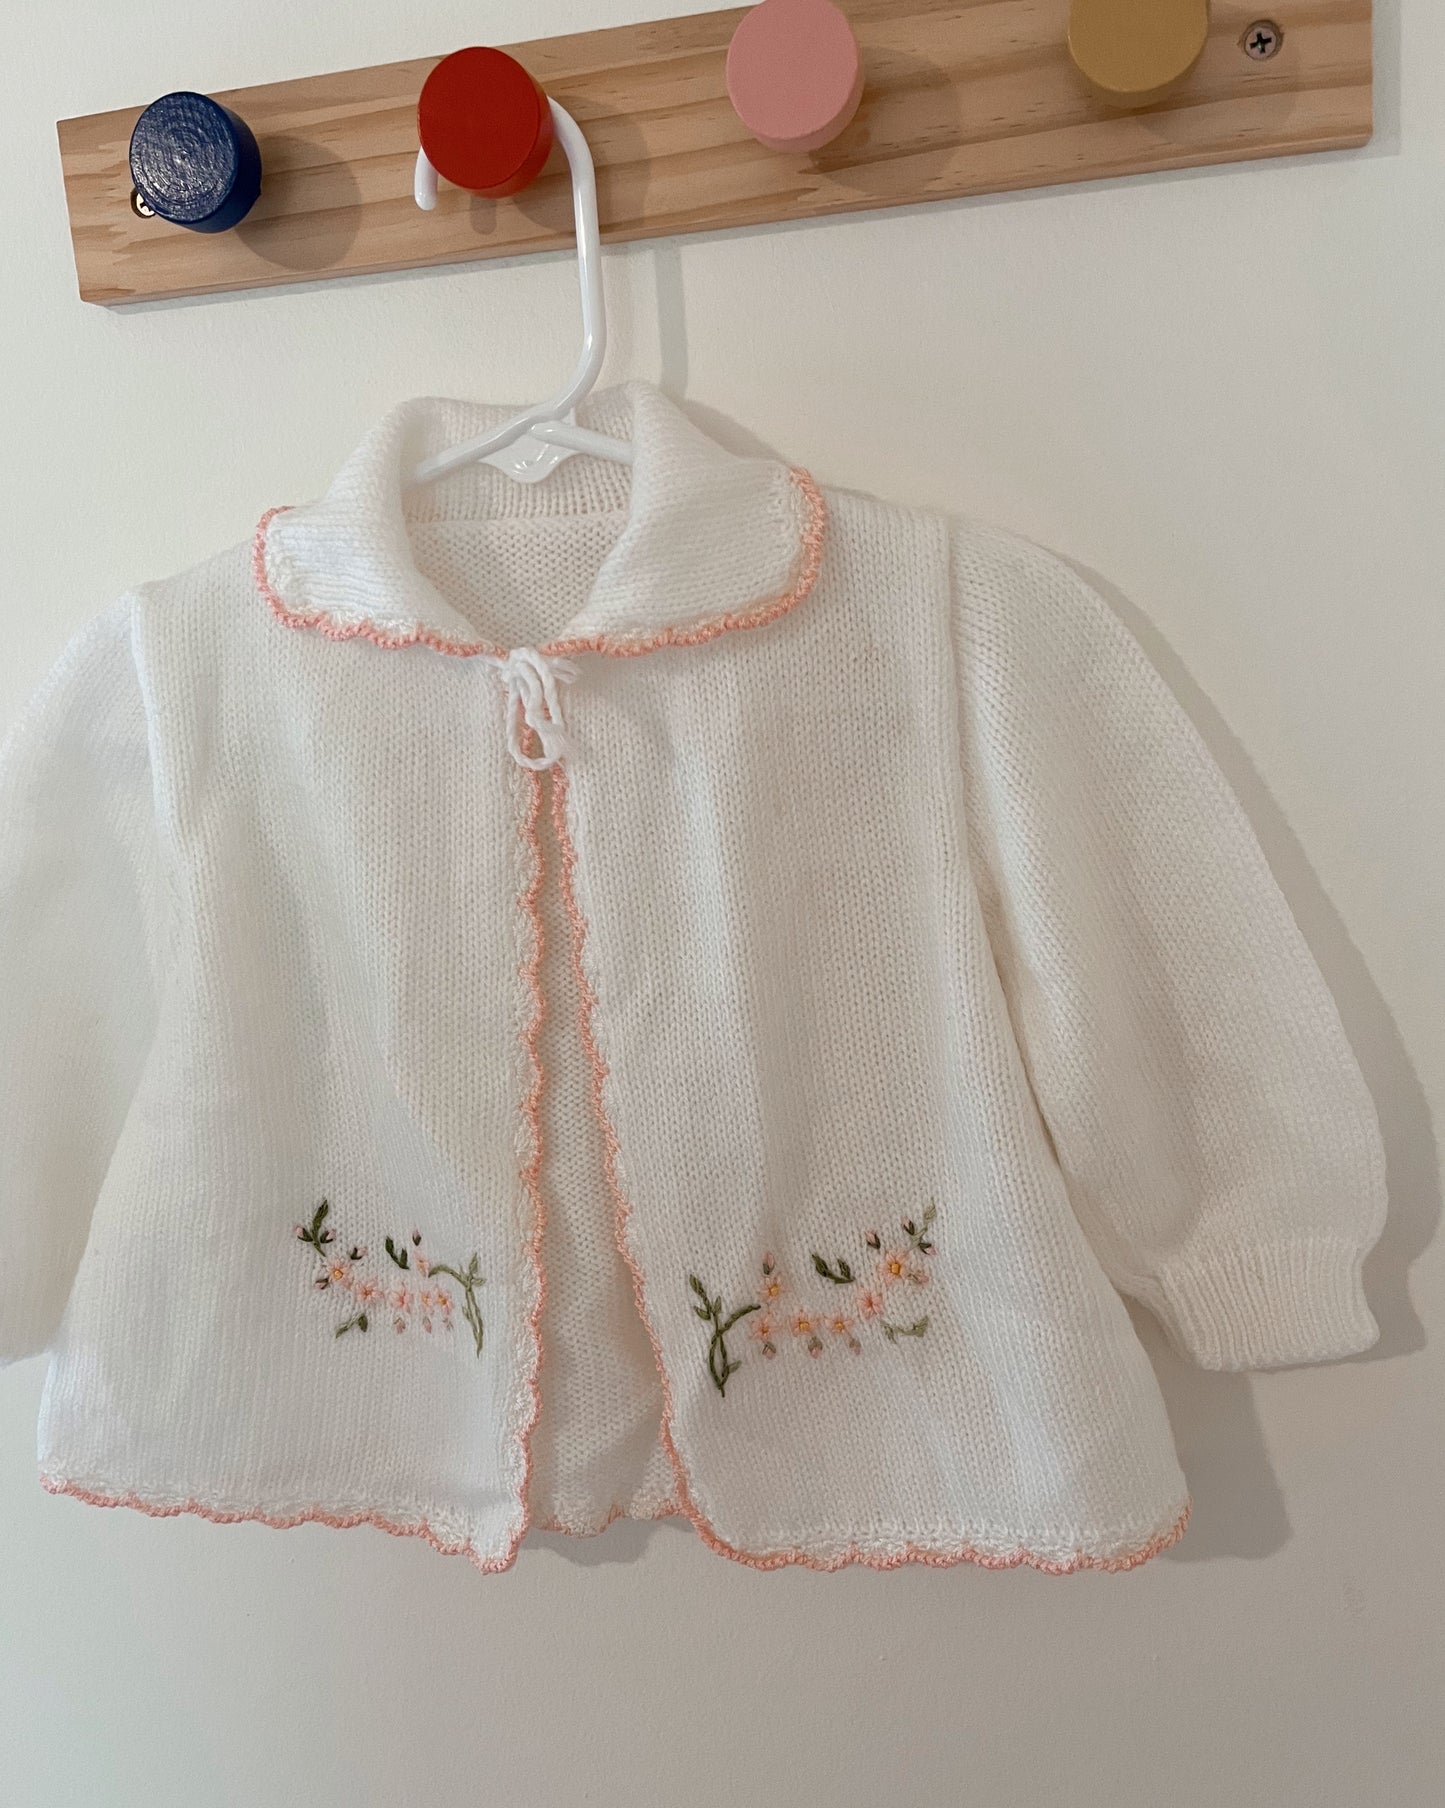 Vintage Floral Embroidered Cardigan - Pink and White - 12-18 Months